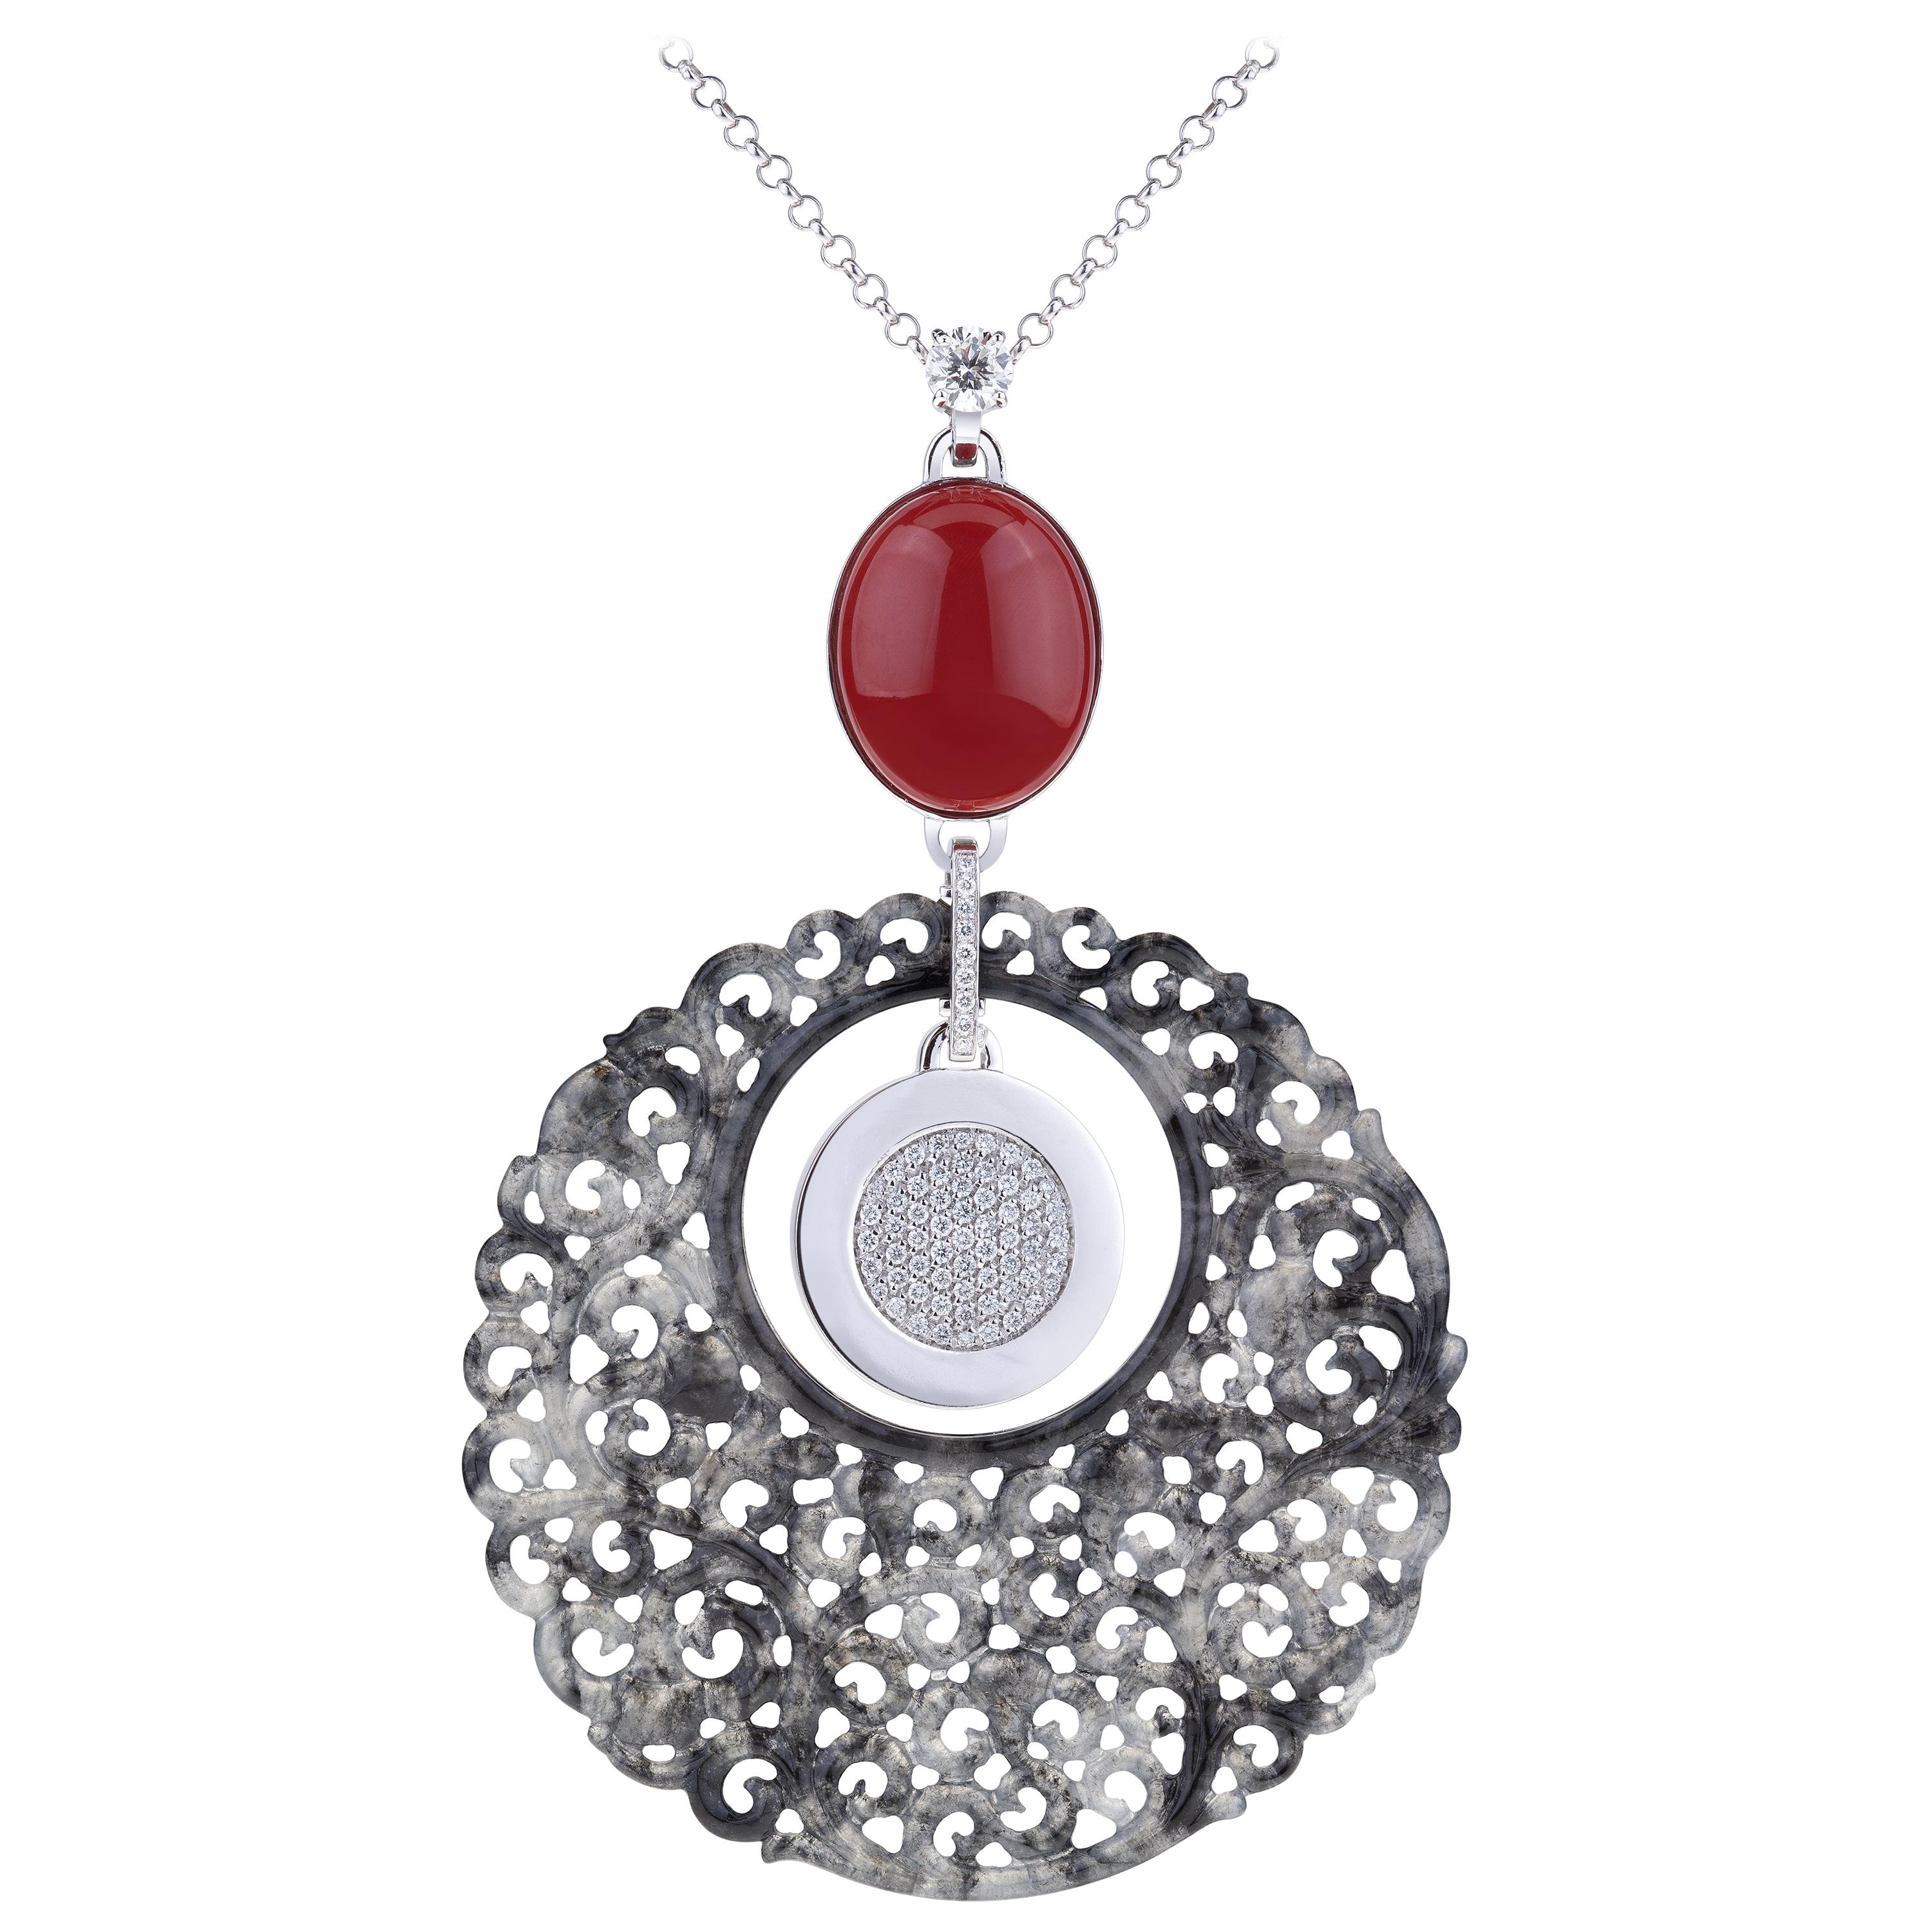 Pendant White Gold Carved Translucent Jade, Solitaire Diamond, Red Coral